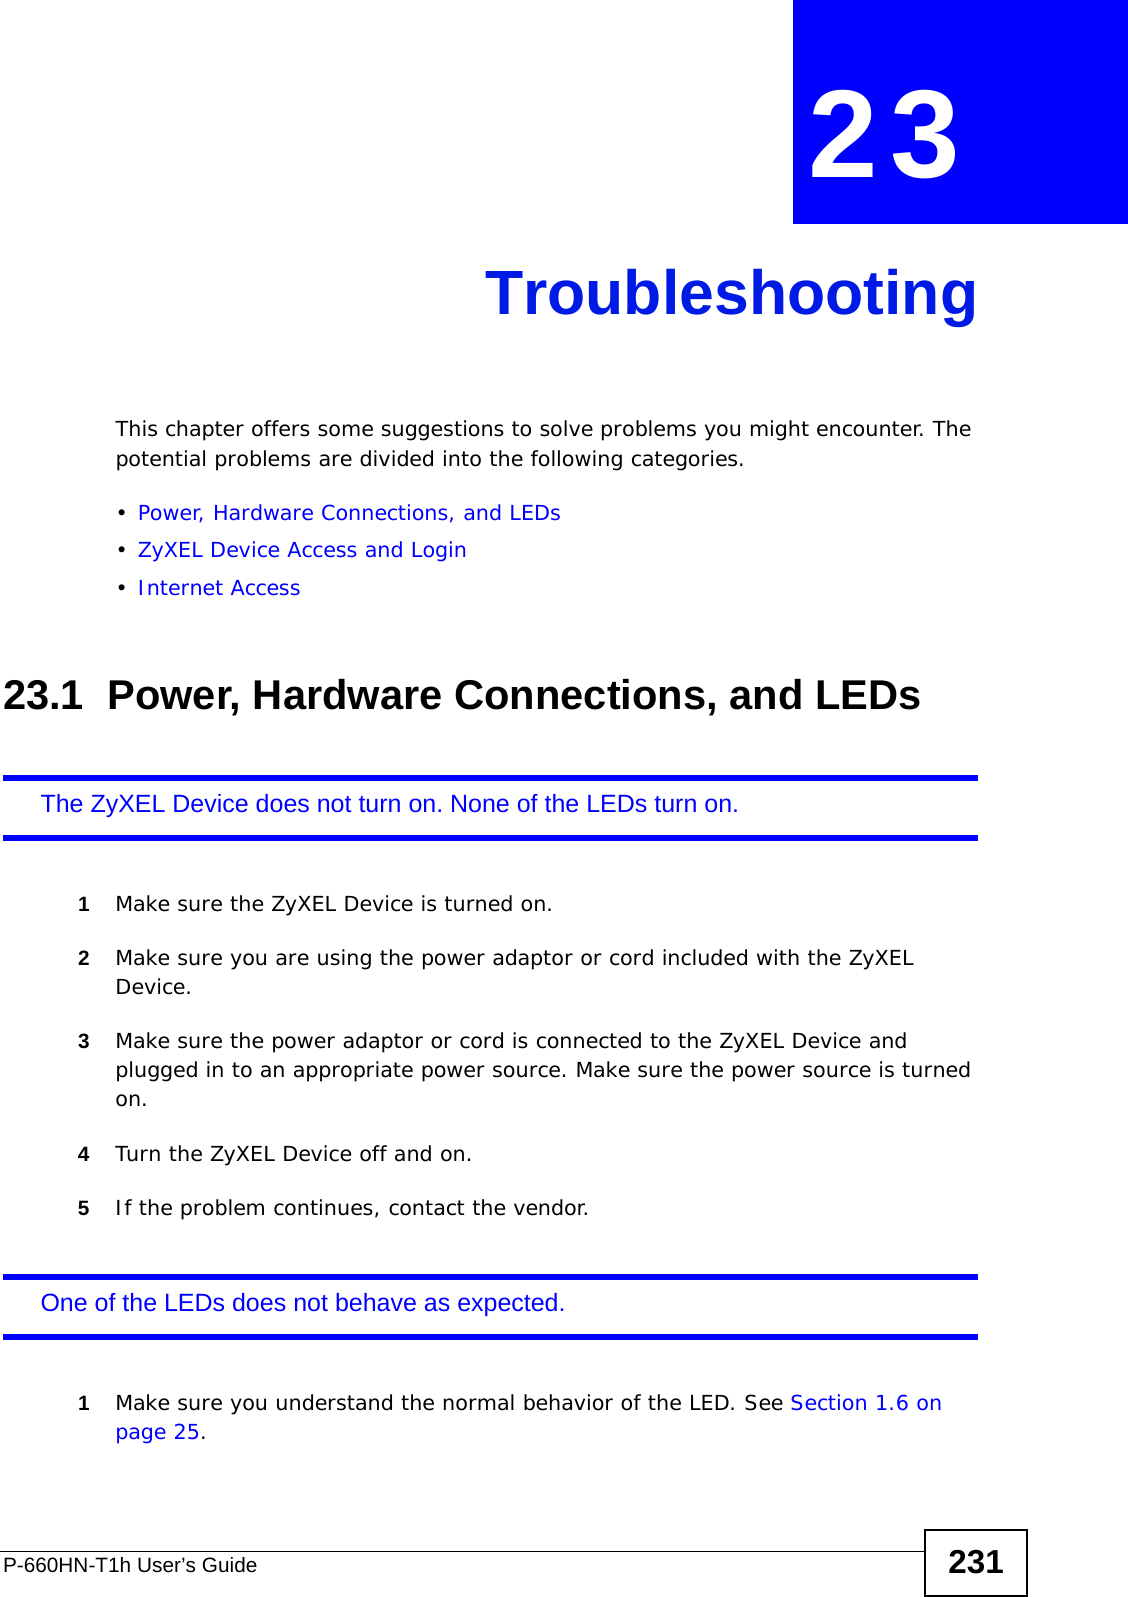 P-660HN-T1h User’s Guide 231CHAPTER  23 TroubleshootingThis chapter offers some suggestions to solve problems you might encounter. The potential problems are divided into the following categories. •Power, Hardware Connections, and LEDs•ZyXEL Device Access and Login•Internet Access23.1  Power, Hardware Connections, and LEDsThe ZyXEL Device does not turn on. None of the LEDs turn on.1Make sure the ZyXEL Device is turned on. 2Make sure you are using the power adaptor or cord included with the ZyXEL Device.3Make sure the power adaptor or cord is connected to the ZyXEL Device and plugged in to an appropriate power source. Make sure the power source is turned on.4Turn the ZyXEL Device off and on.5If the problem continues, contact the vendor.One of the LEDs does not behave as expected.1Make sure you understand the normal behavior of the LED. See Section 1.6 on page 25.